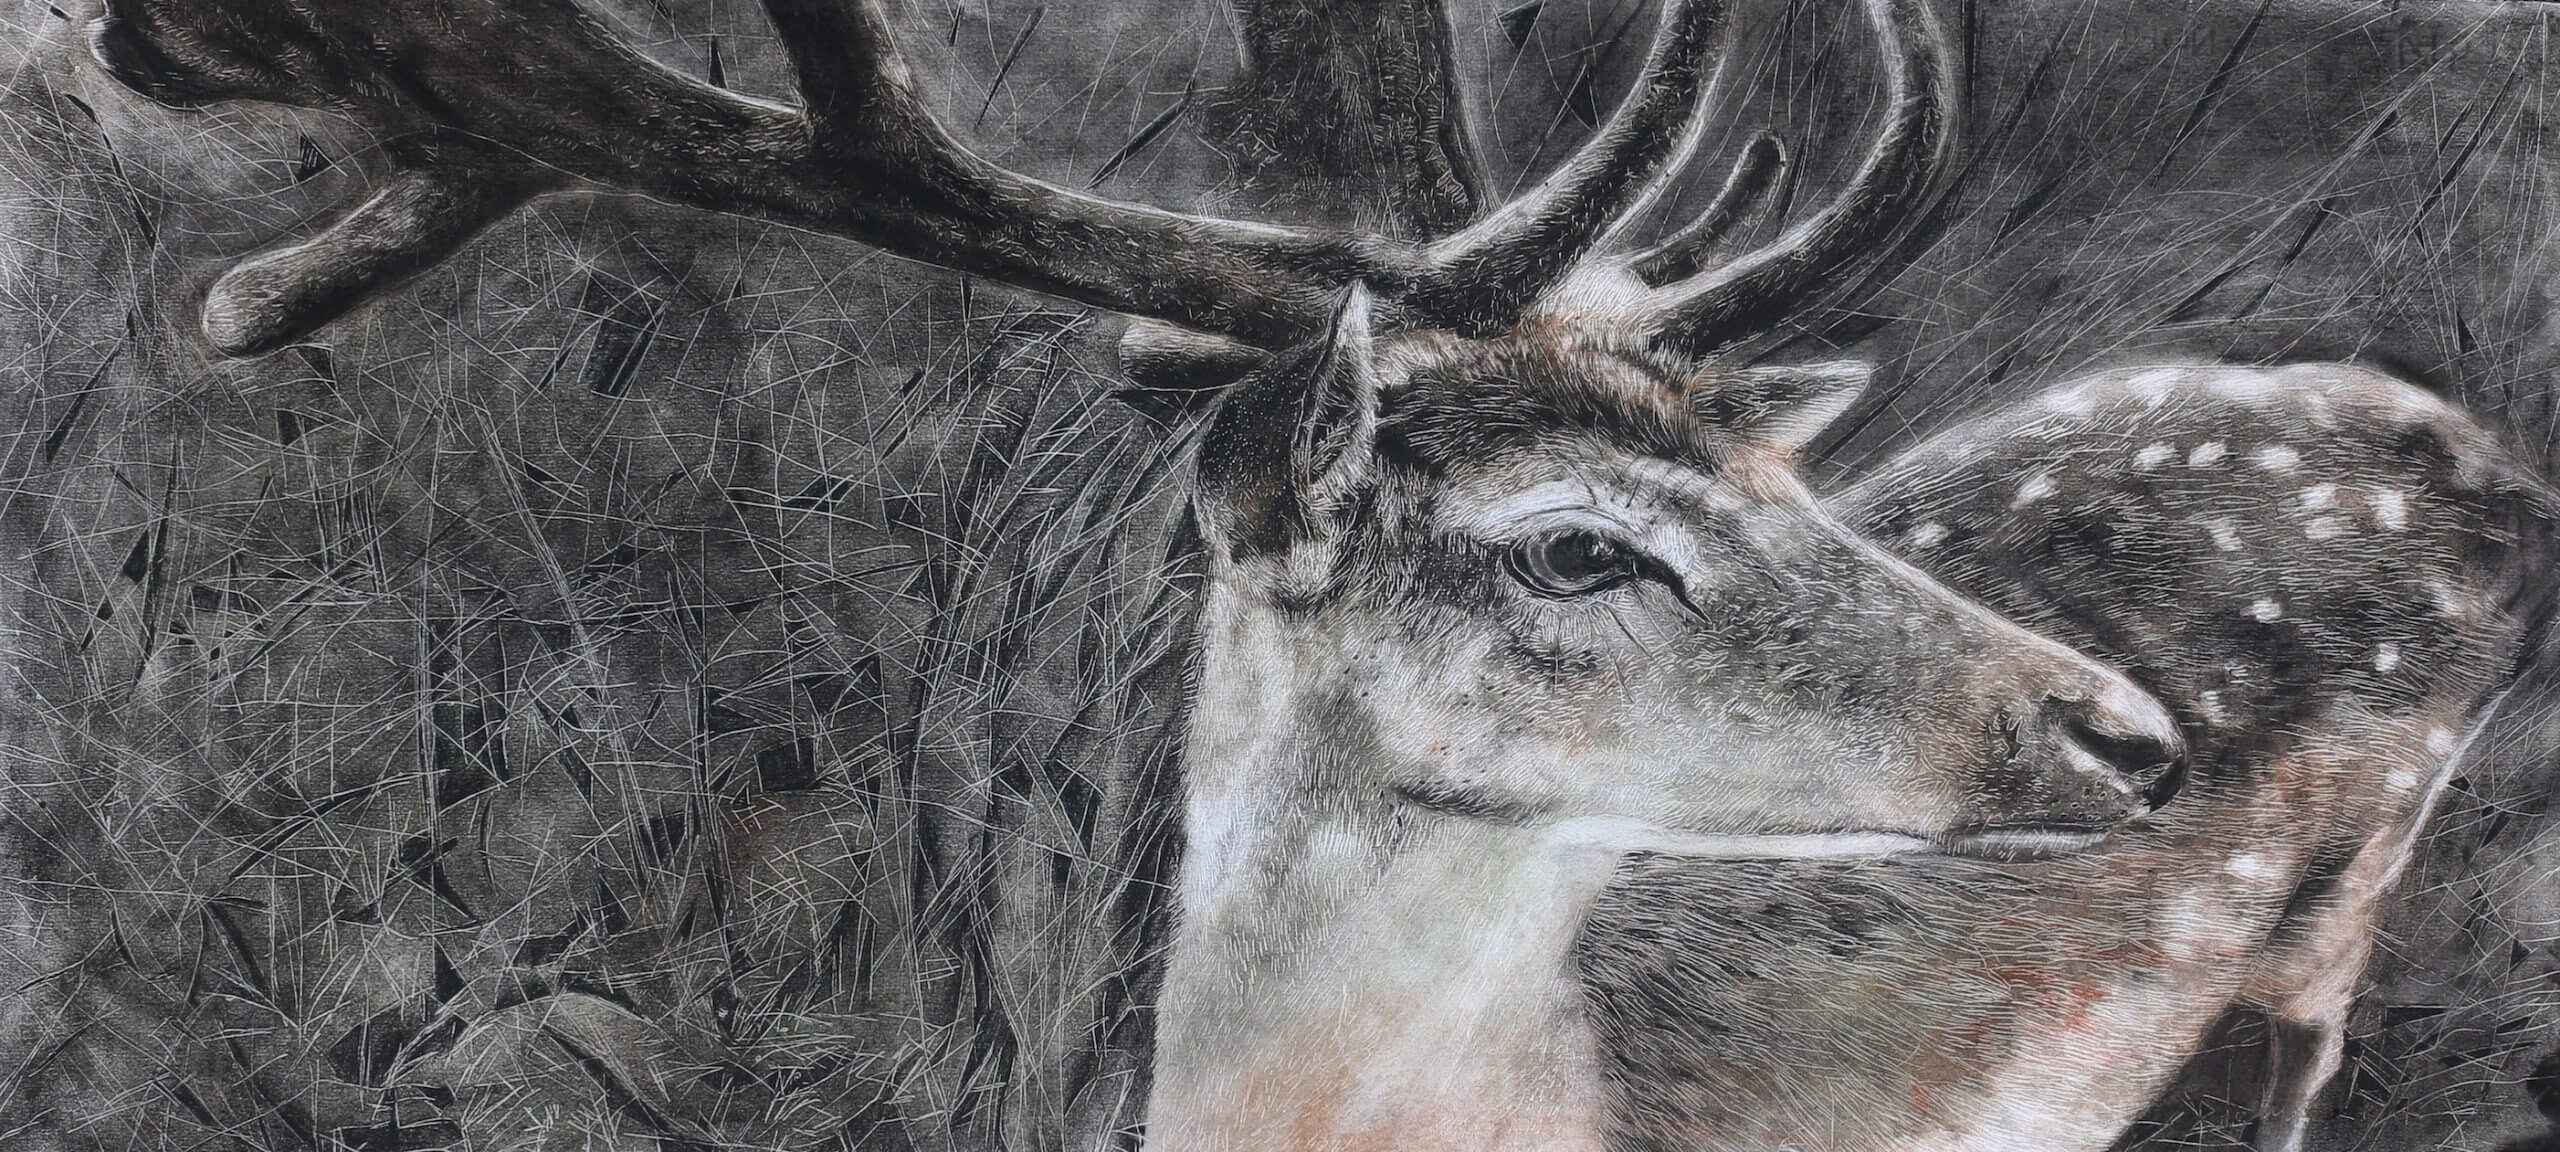 “i’m a deer you are a hunter“ 45x100cm 2018 mixed technique on the paper